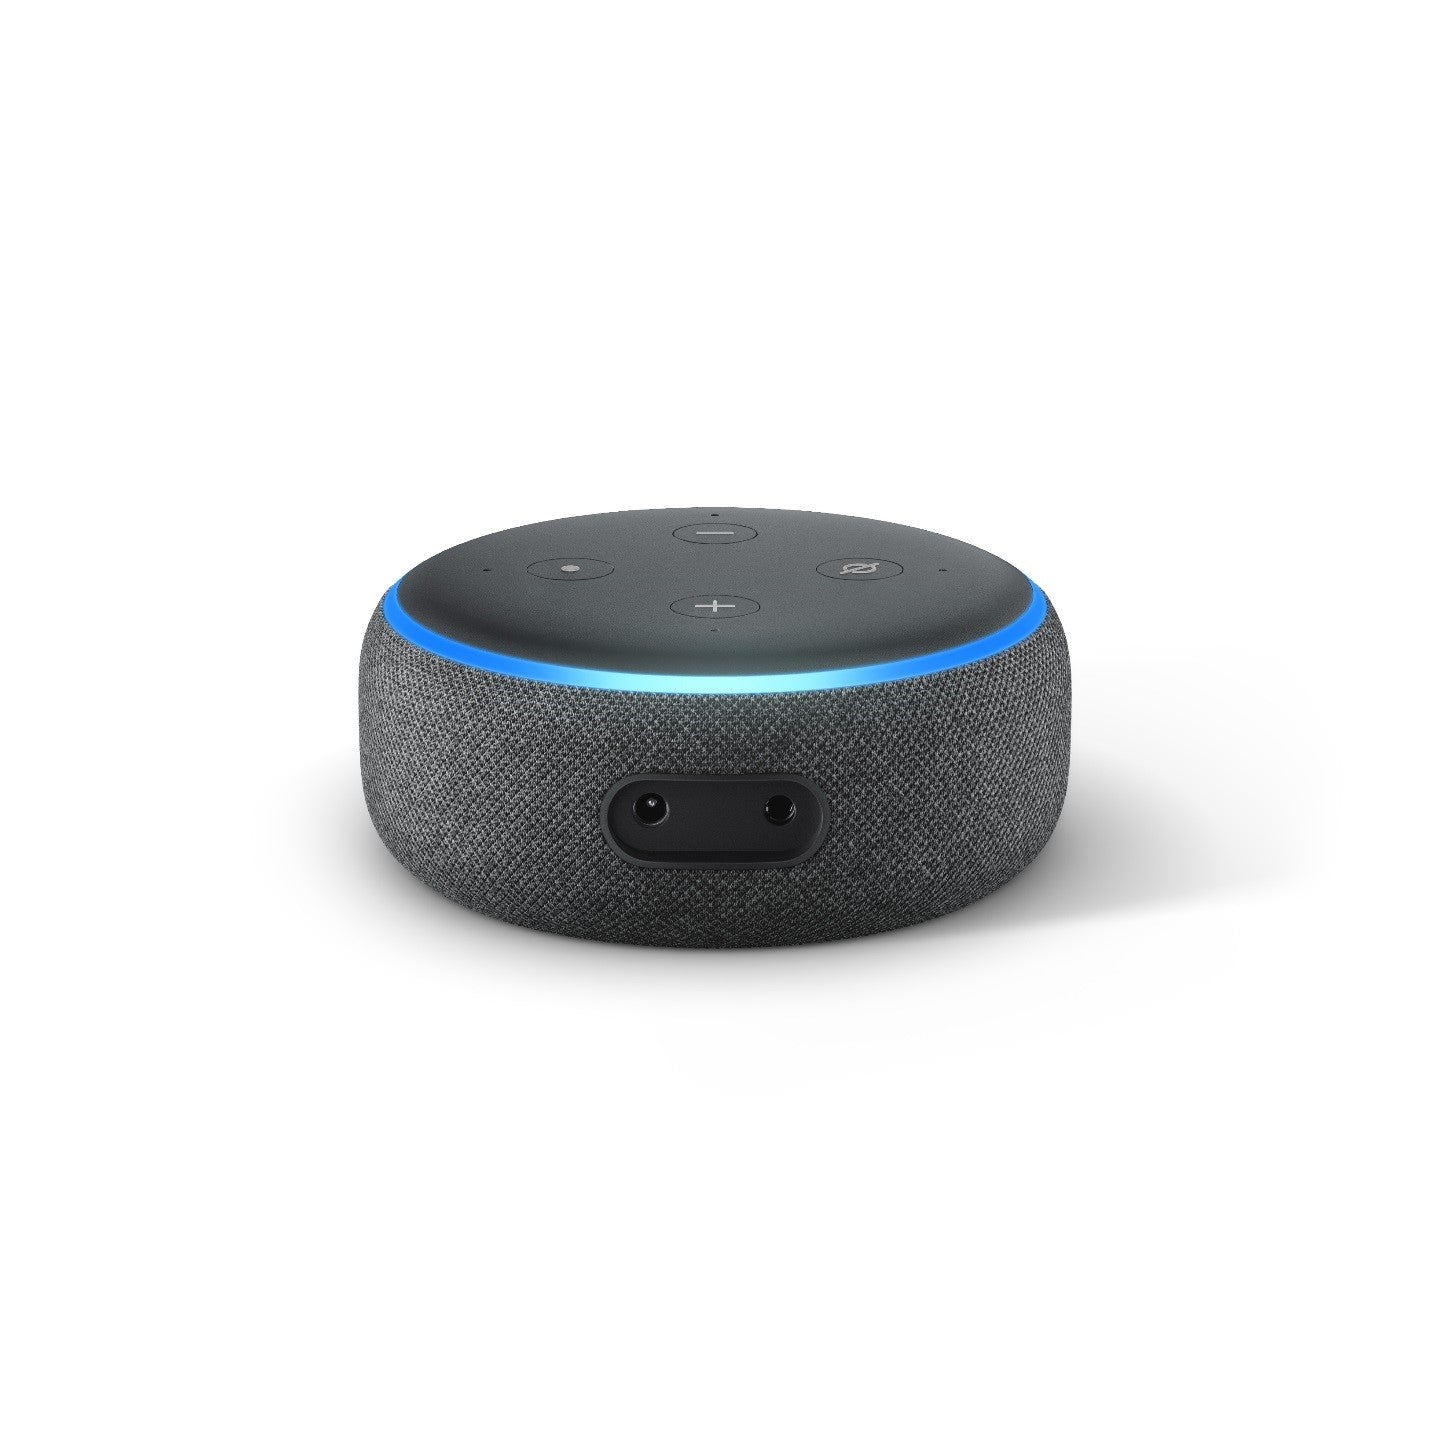 what devices work with echo dot